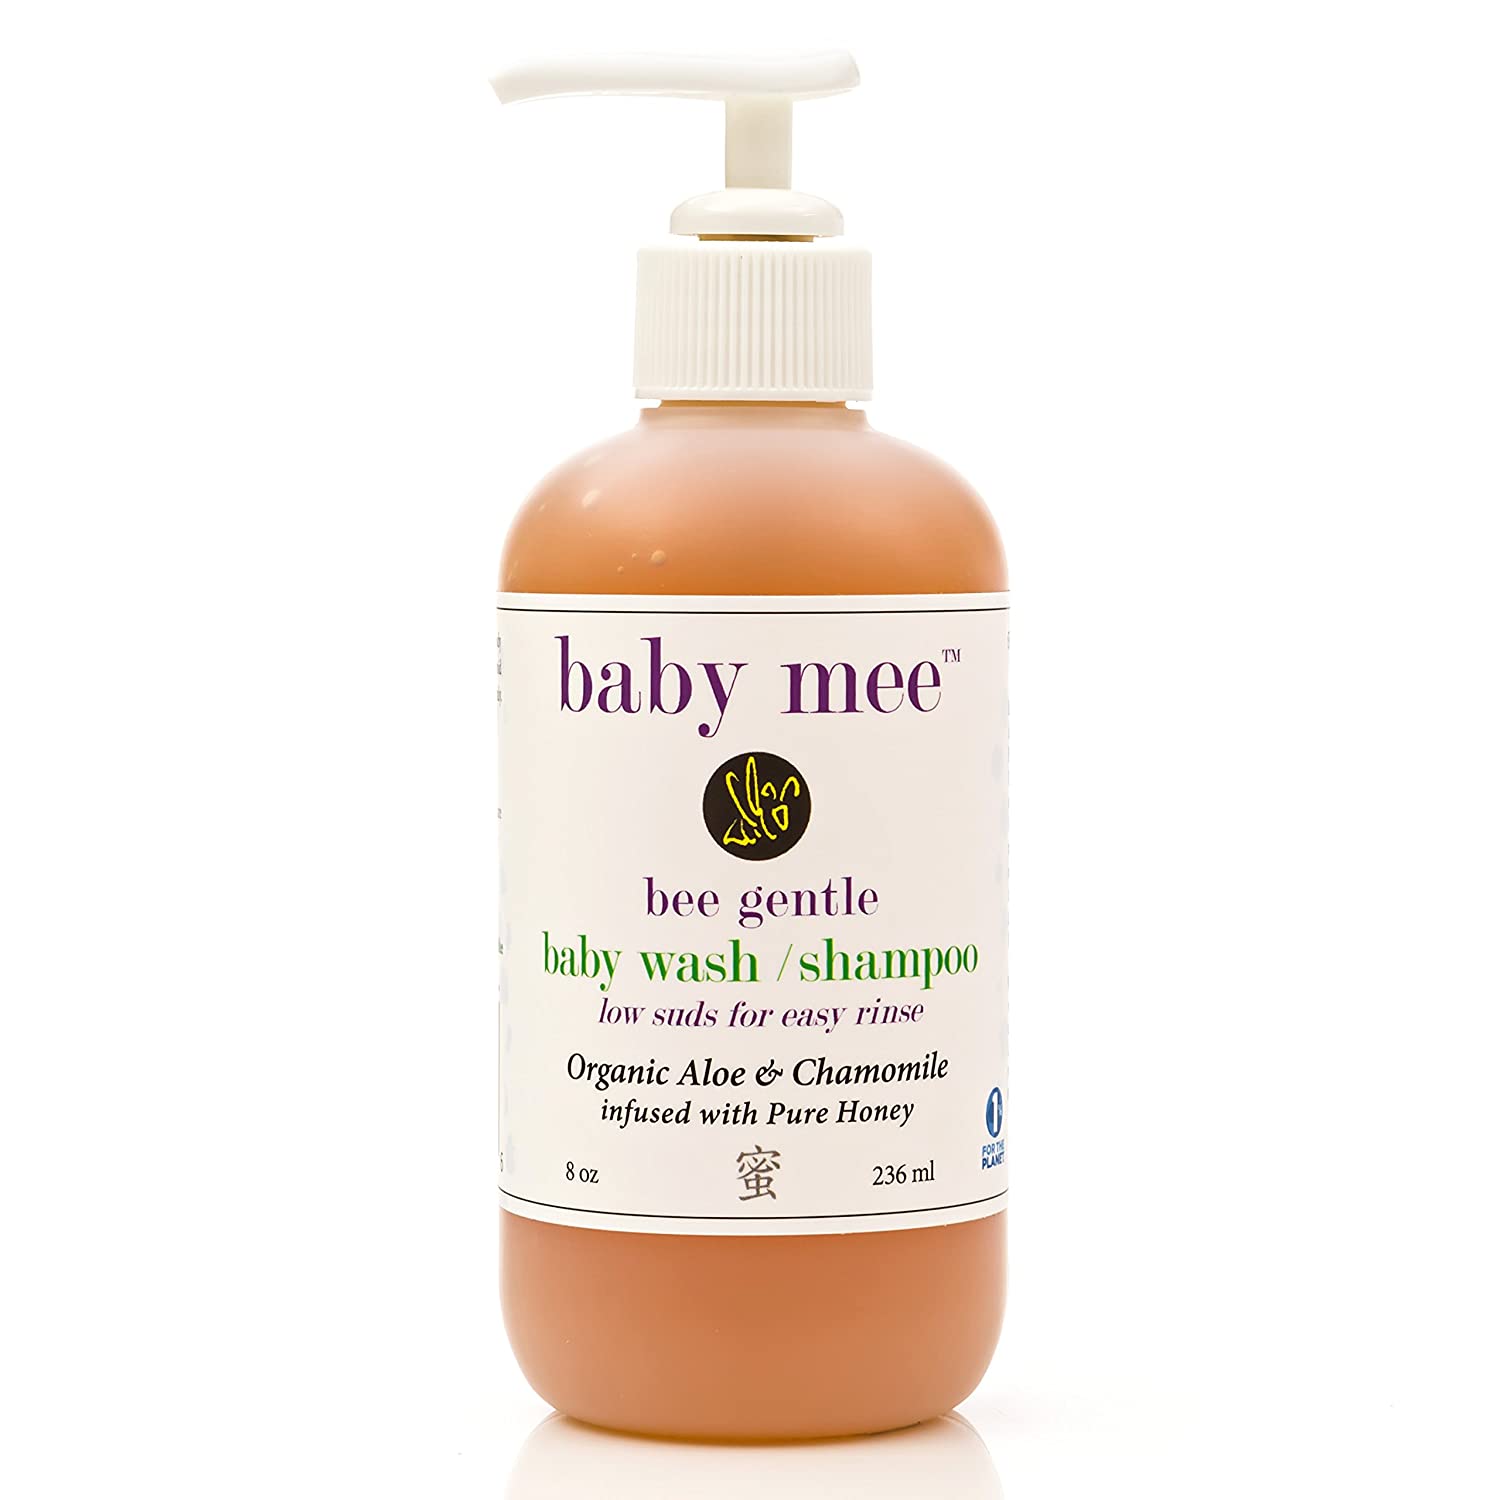 Top 13 Best Organic Baby Washes 2023 - Review & Buying Guide 10